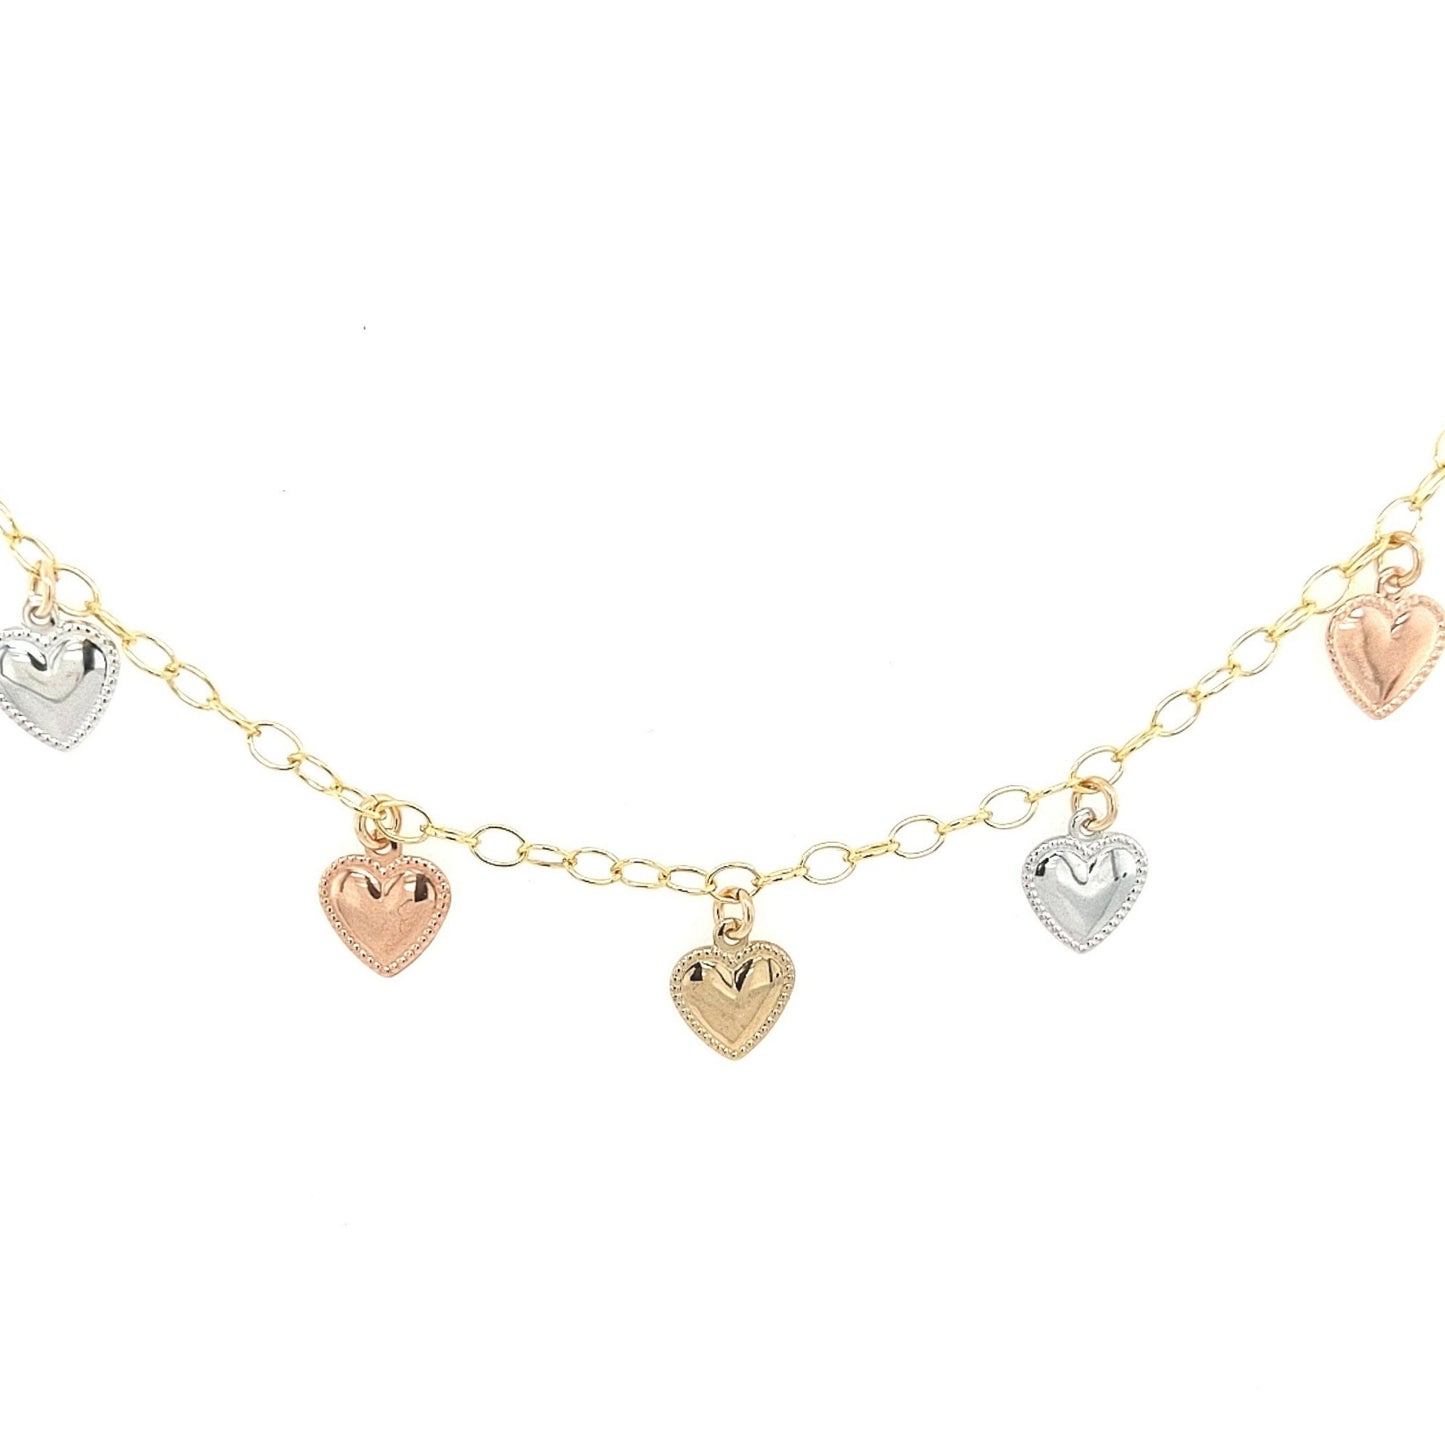 Gold Filled Chain With Hanging Gold and Rose Gold Hearts Bracelet - HK Jewels